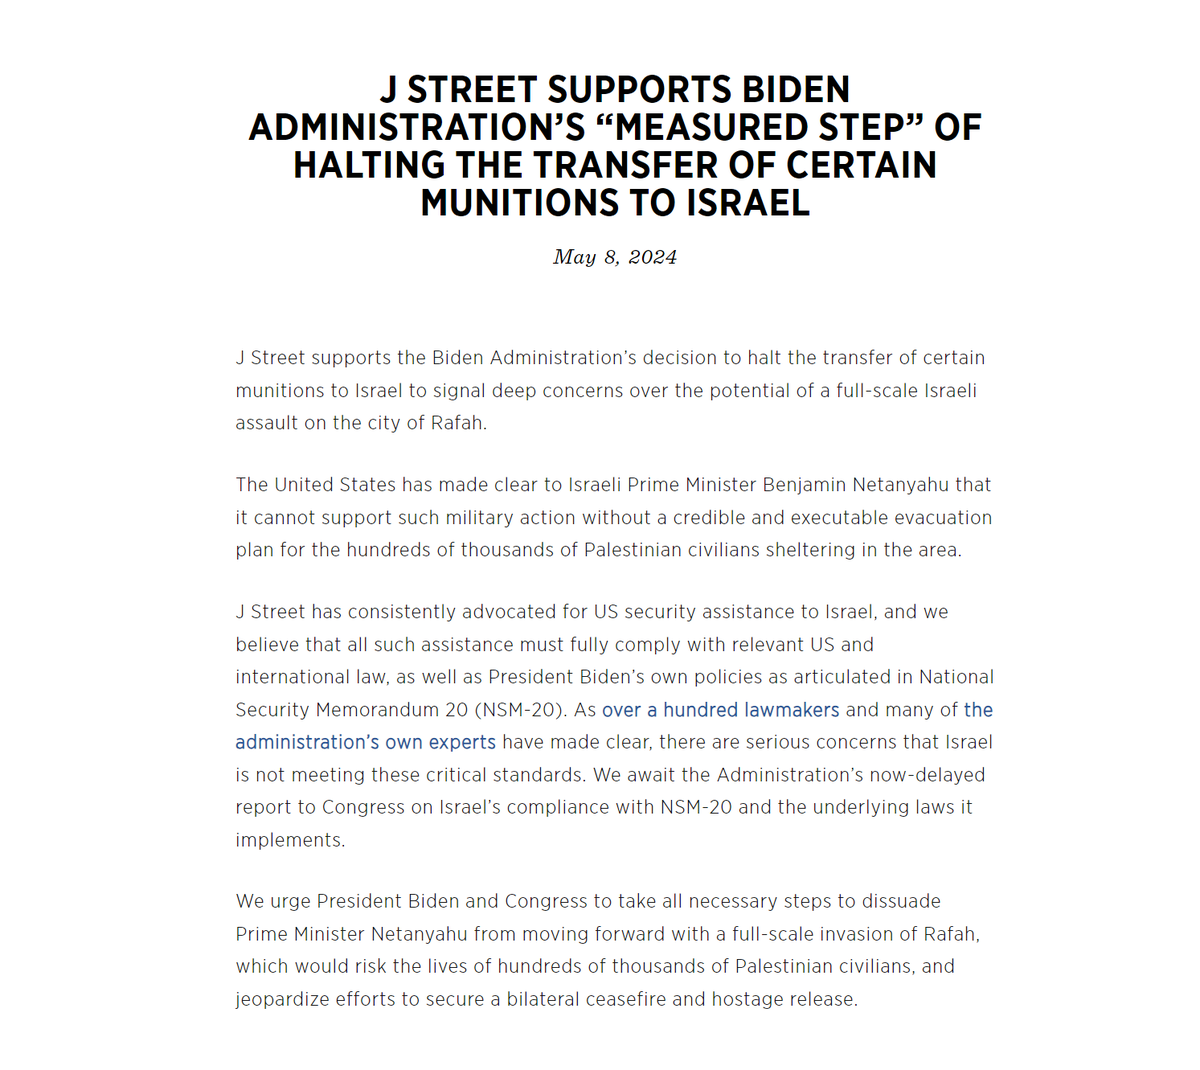 J Street supports the Biden Administration’s decision to halt the transfer of certain munitions to Israel to signal deep concerns over the potential of a full-scale Israeli assault on the city of Rafah. Read our full statement here: jstreet.org/press-releases…